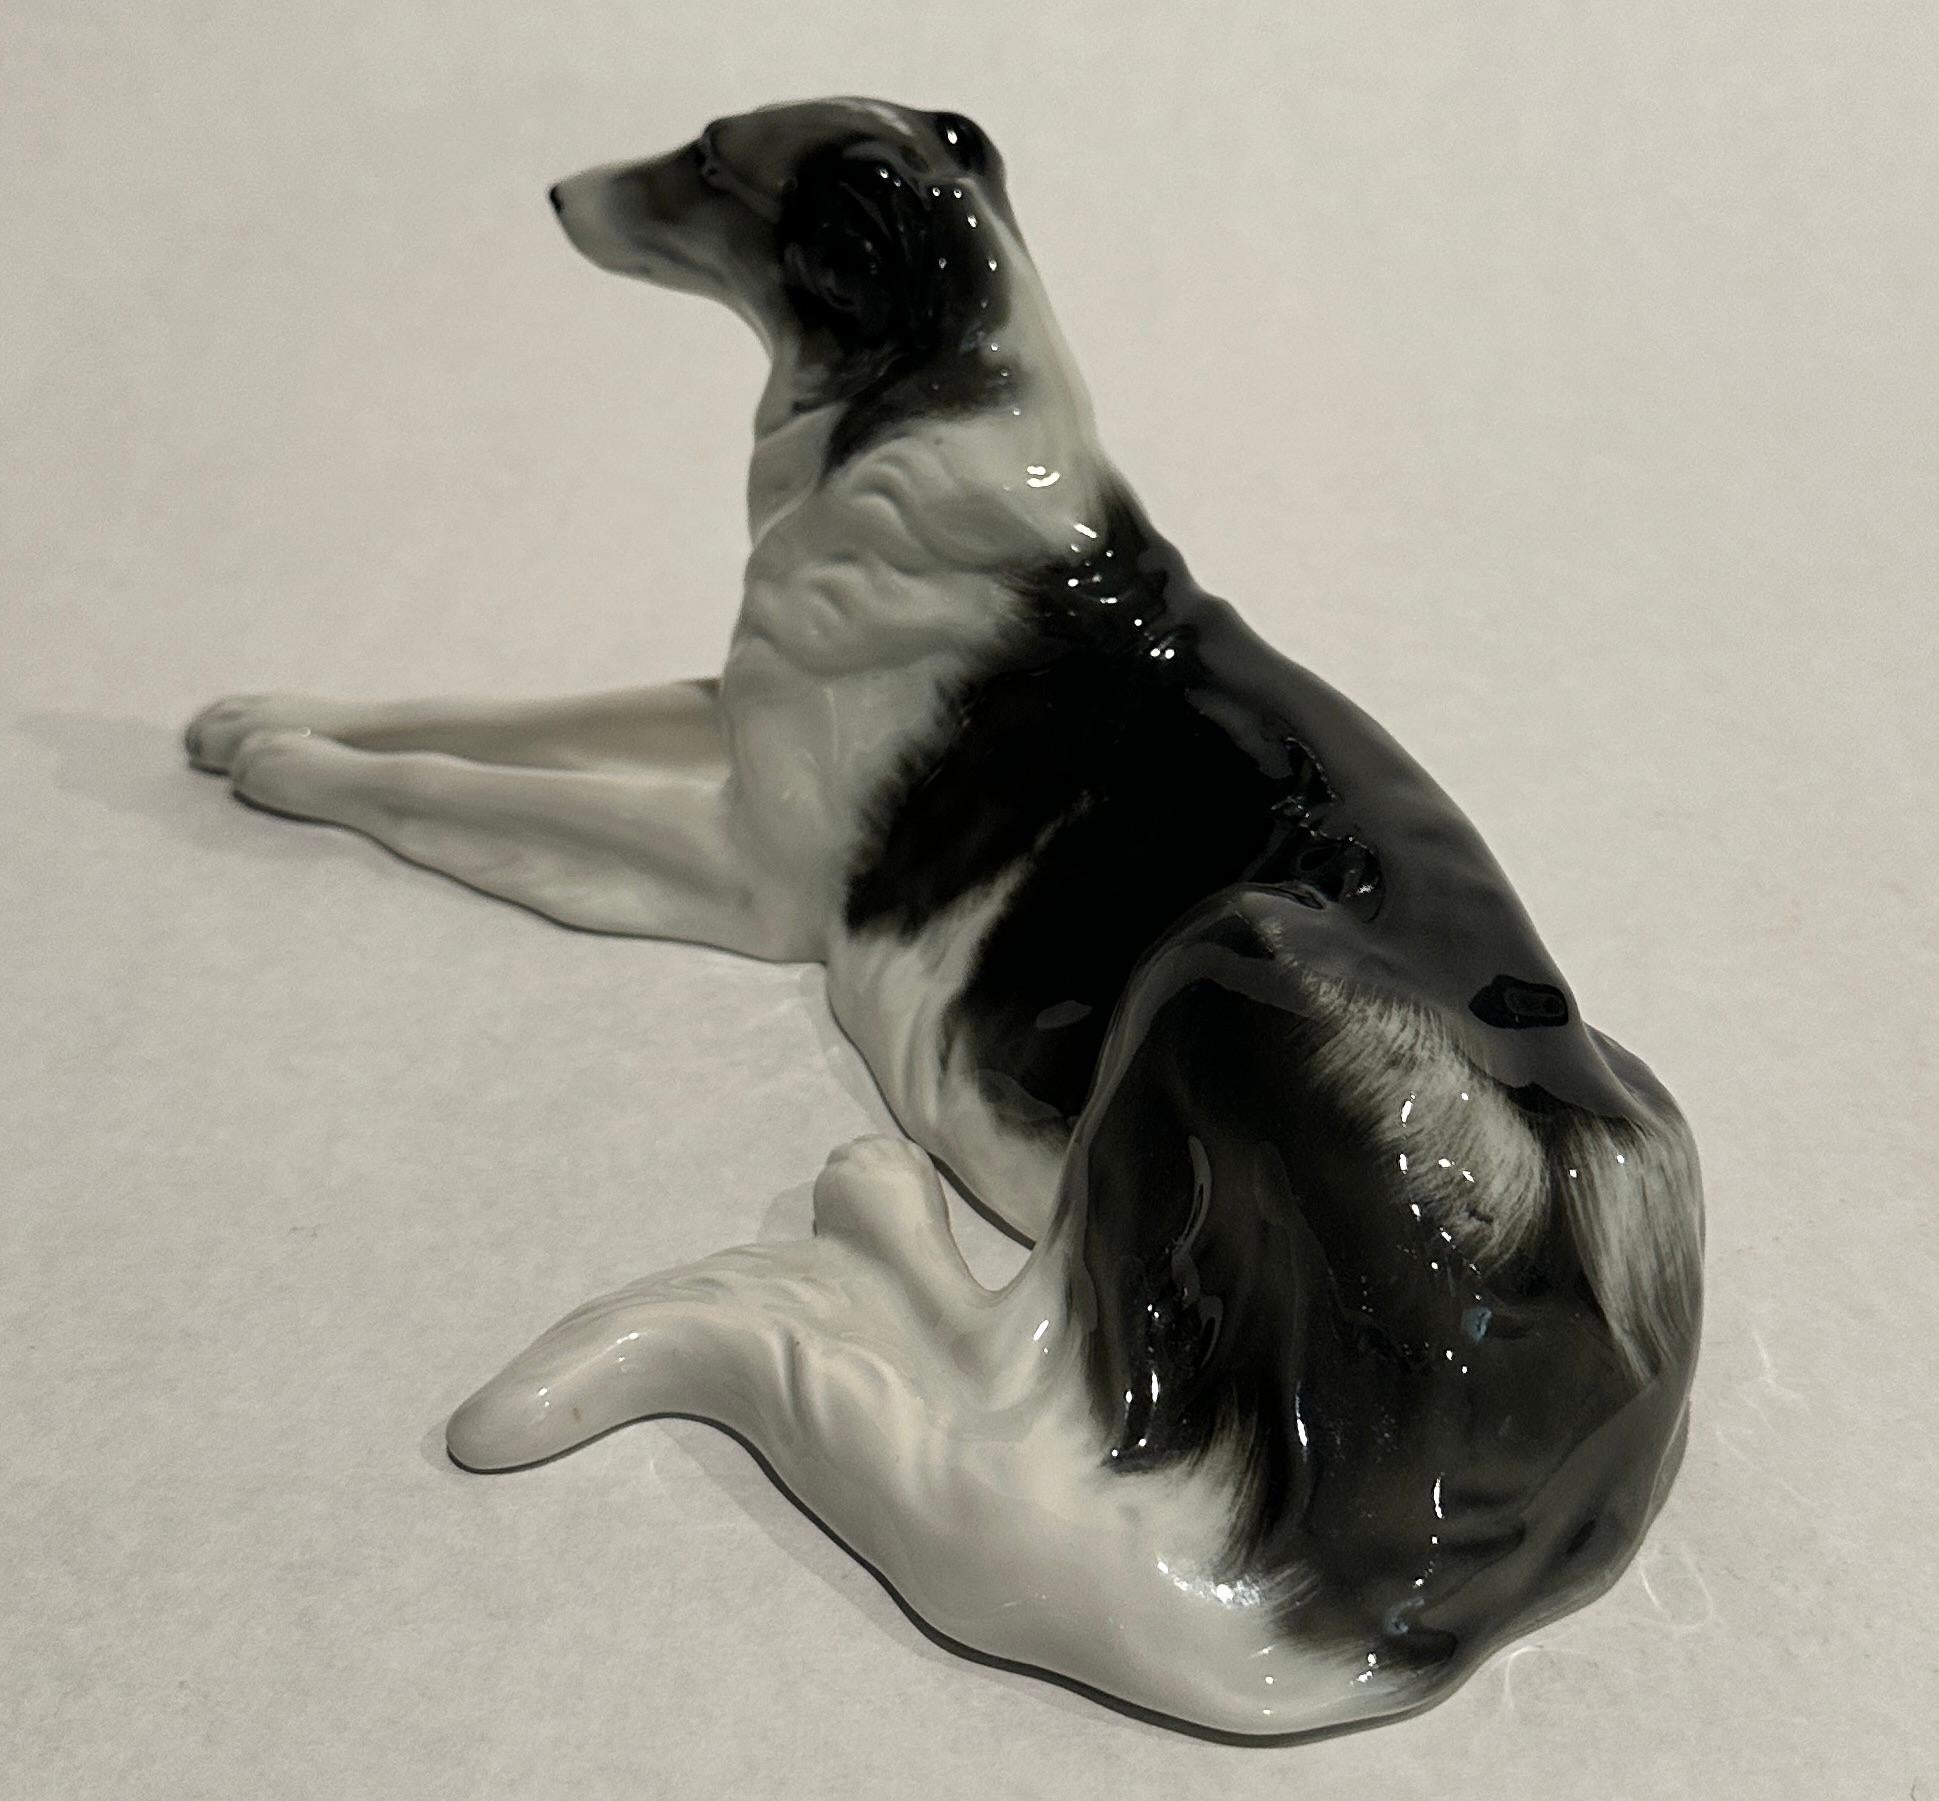 Rosenthal Porcelain Borzoi Dog Sculpture In Good Condition For Sale In Norwood, NJ